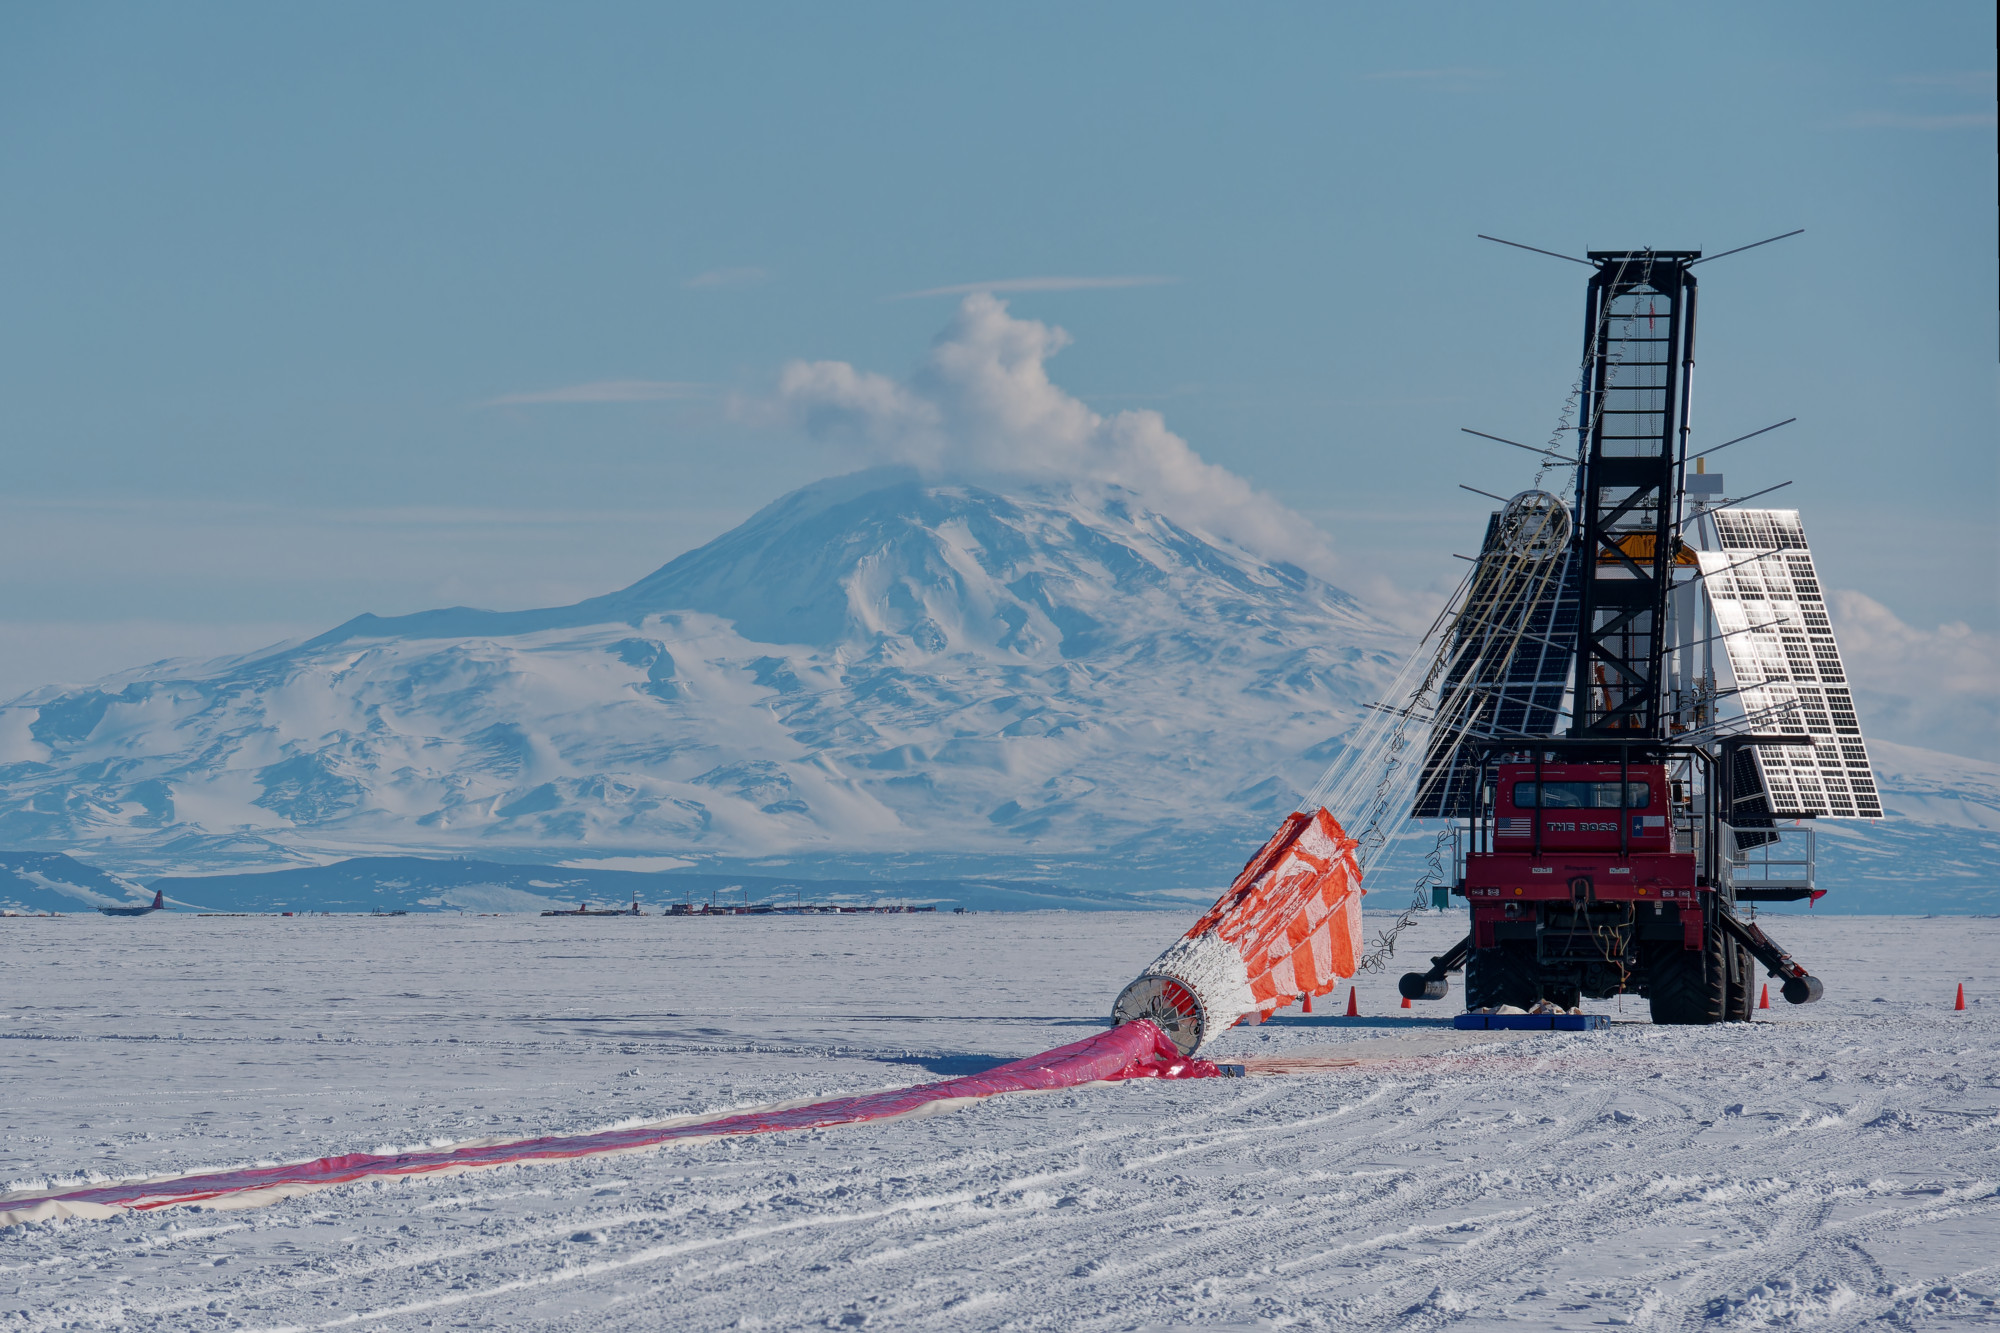 A large scientific observatory with reflective solar panels is suspended from a crane while connected to an orange parachute that is laid on the snow-covered ground. A mountain covered in snow is in the distance.